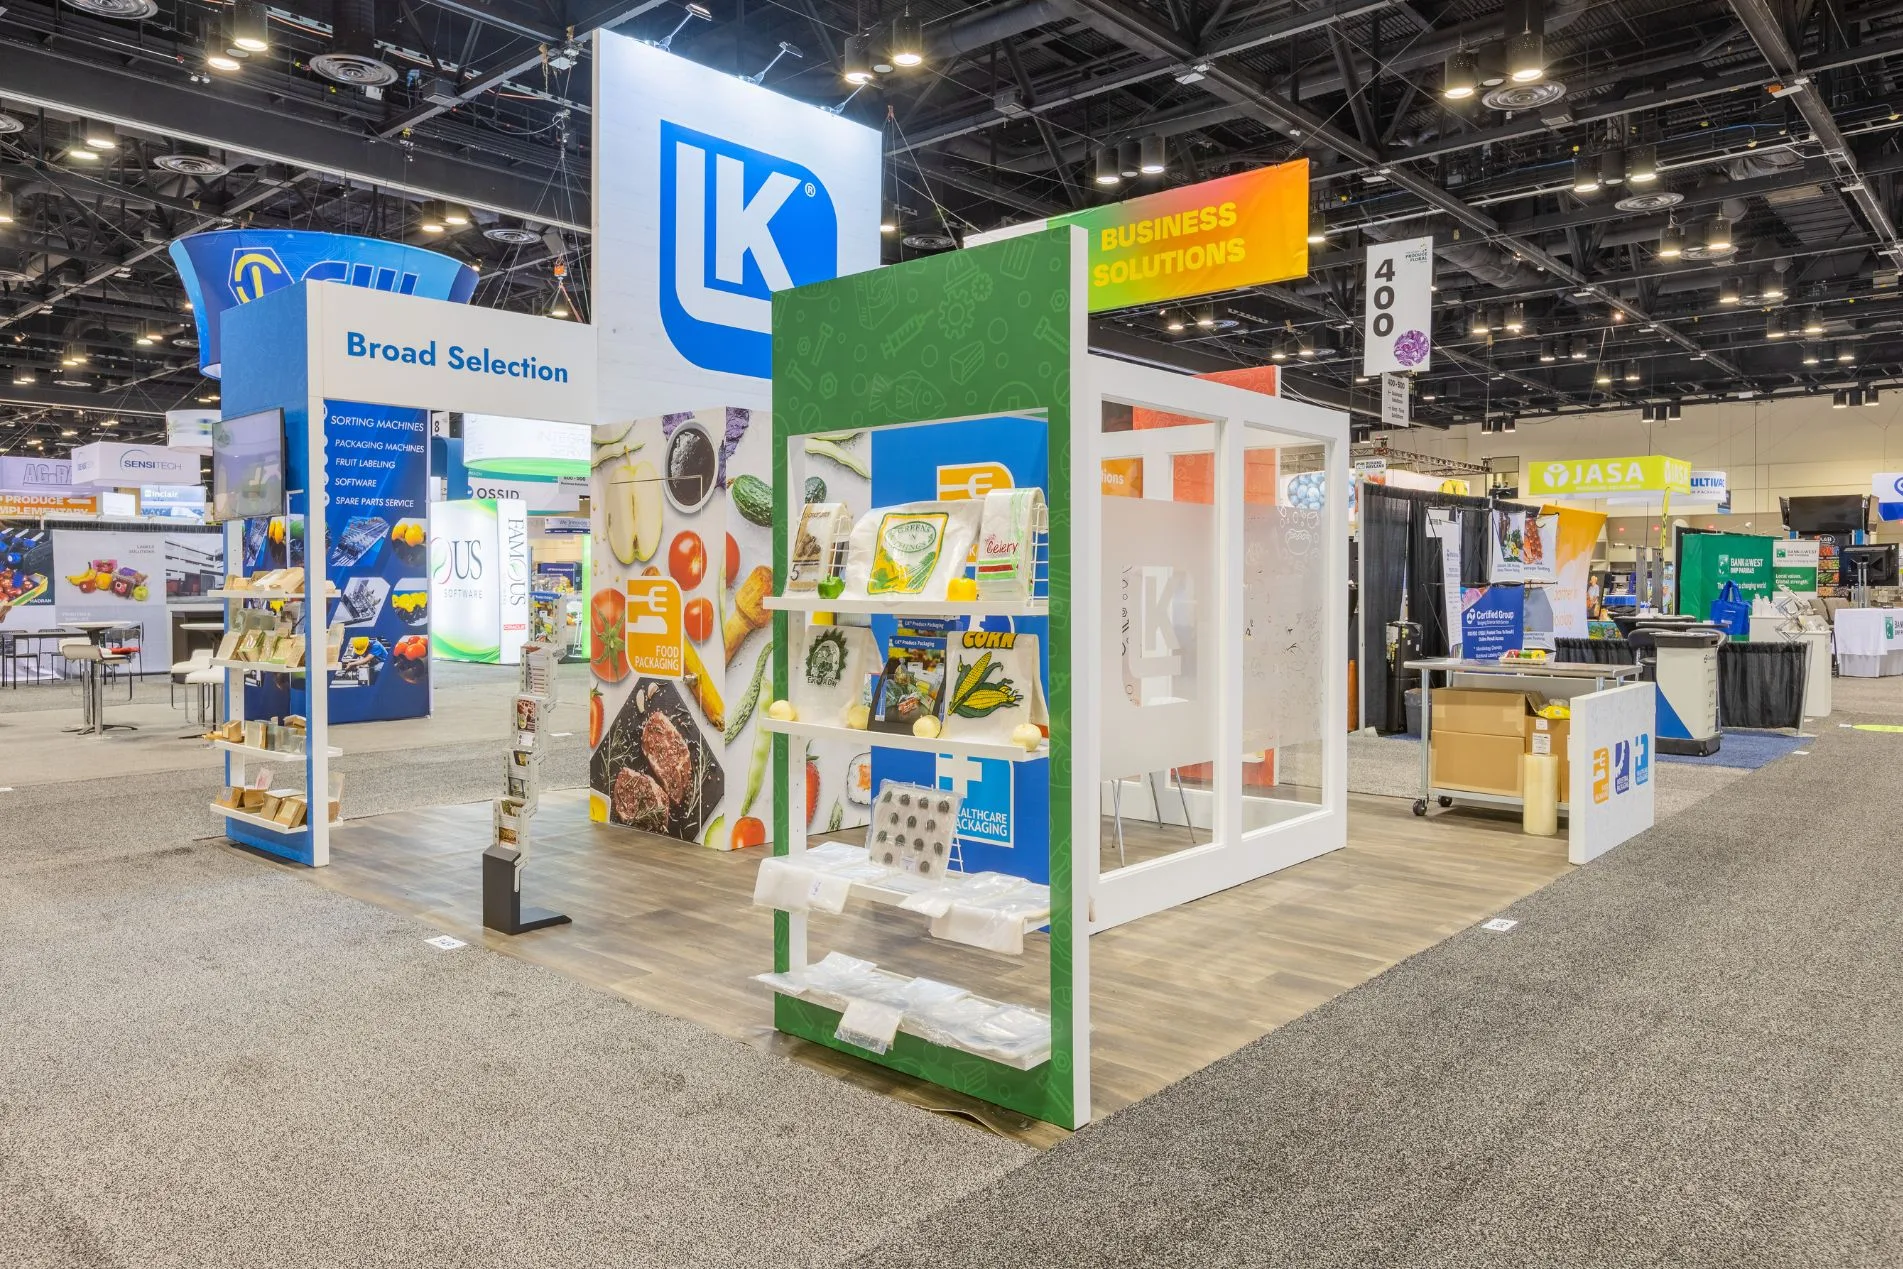 5 Tips for Making Your Trade Show Exhibit Stand Out